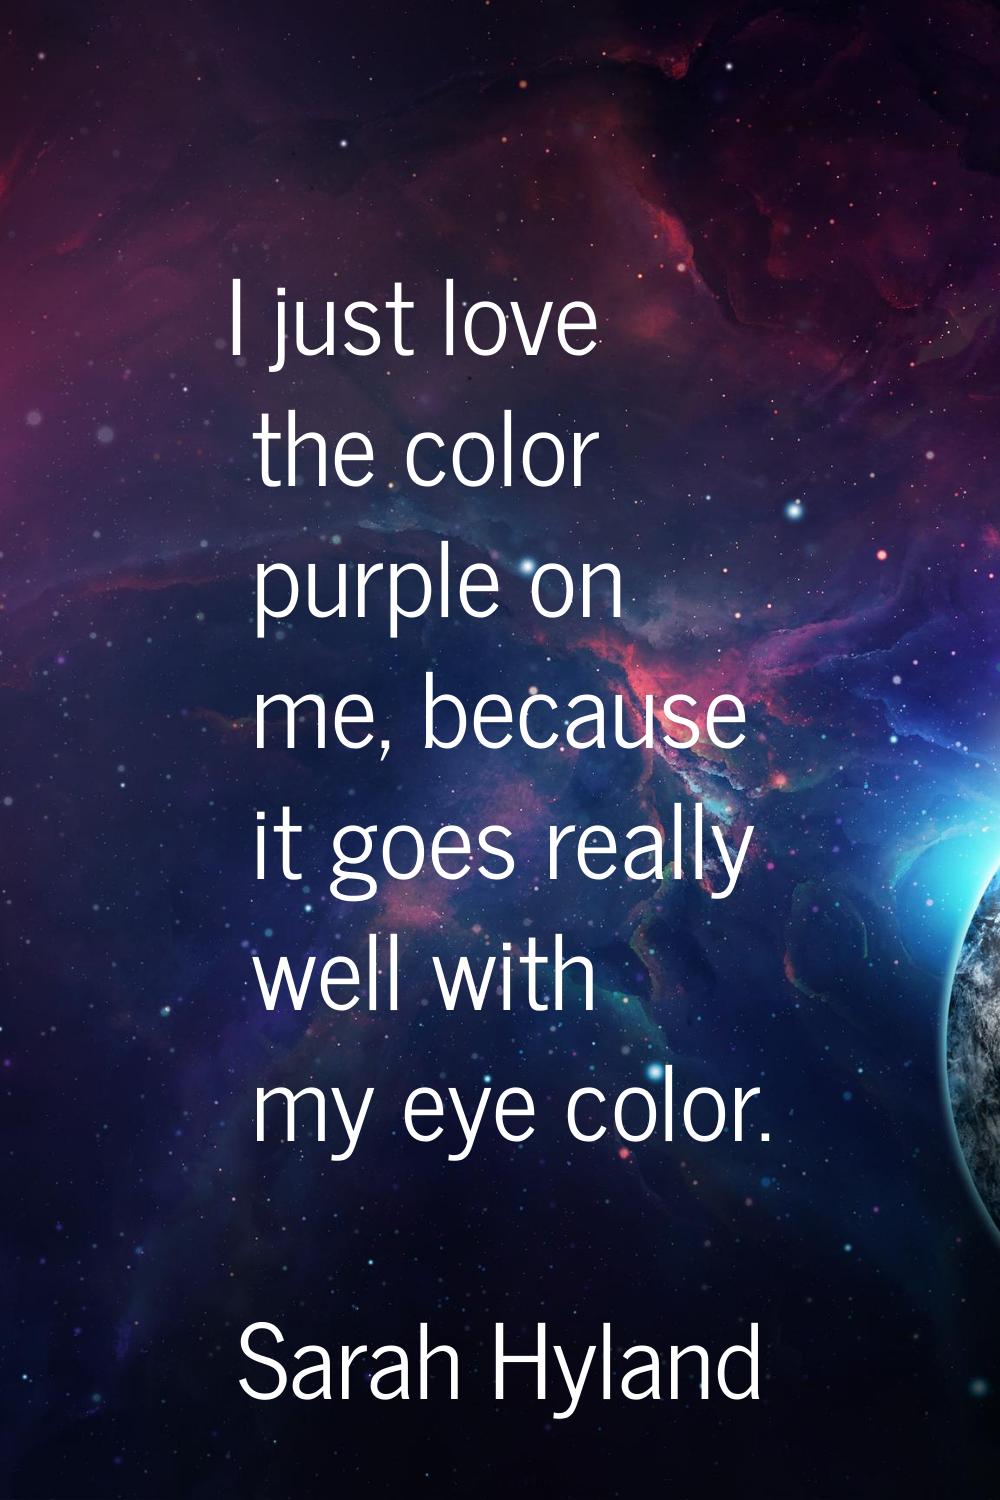 I just love the color purple on me, because it goes really well with my eye color.